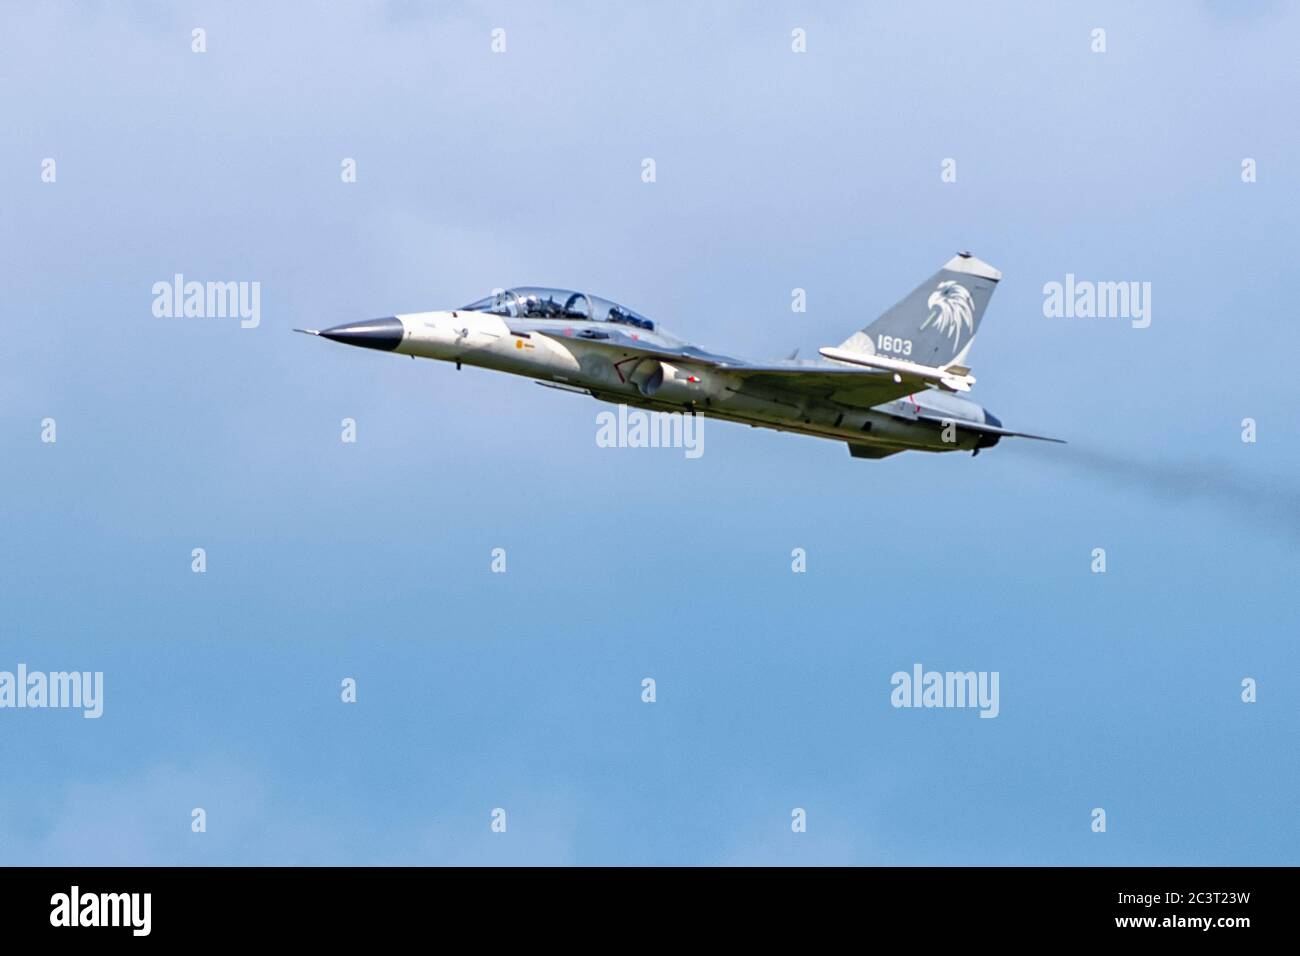 Taichung, Taiwan, June 22, 2020.  Taiwan launches from its Ching Chuan Kang air base the Brave Eagle, Taiwan’s first indigenous advanced jet trainer. Stock Photo